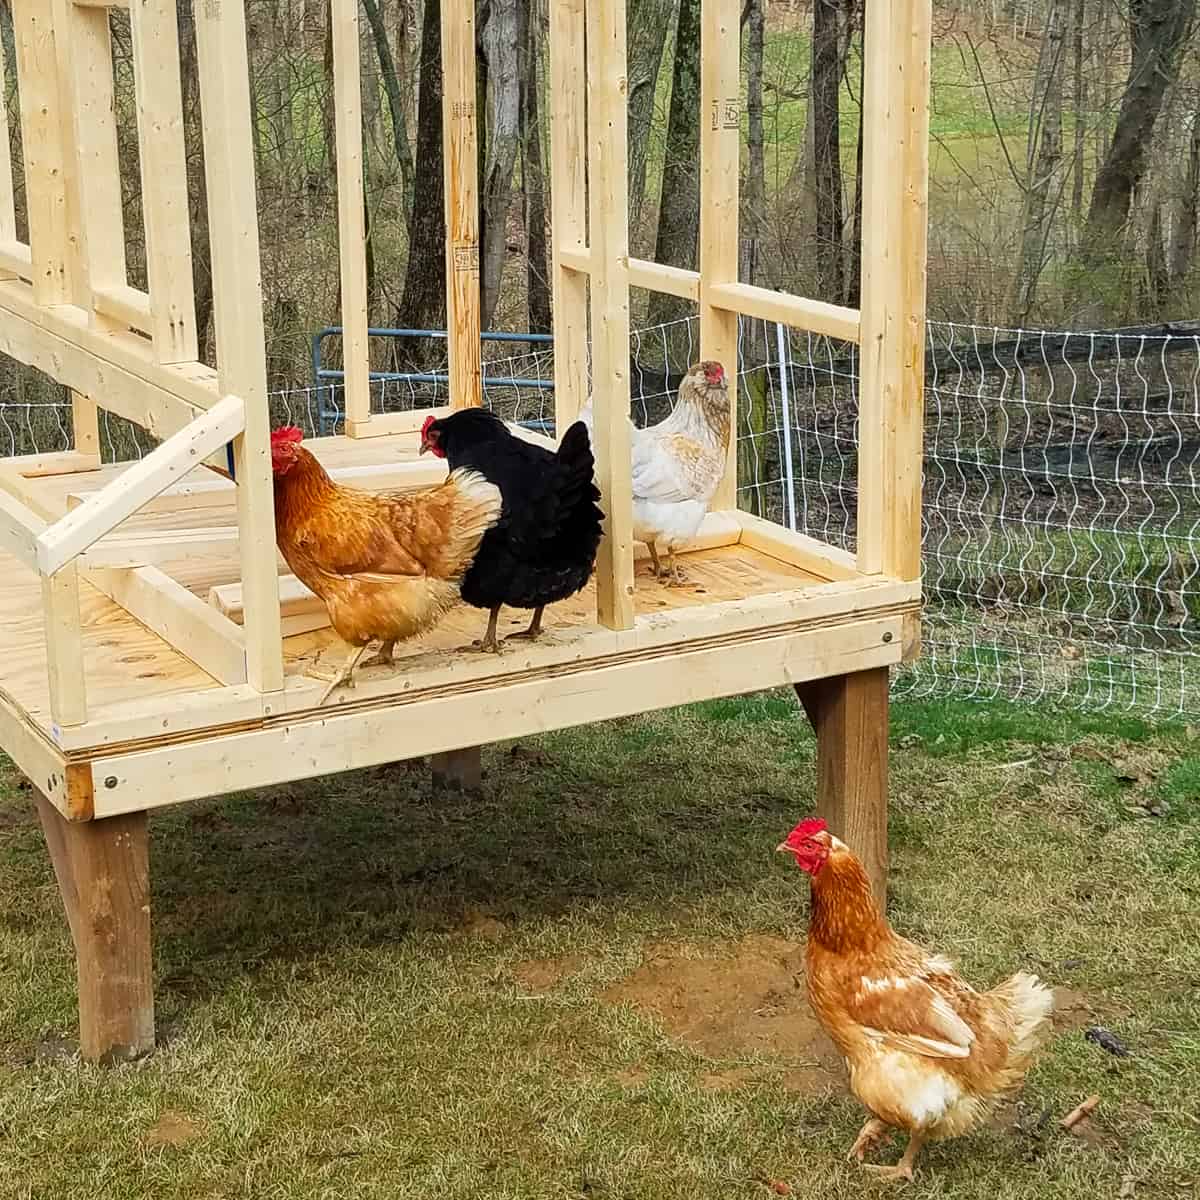 4 chicken hens on a coop being built with legs over the ground and an electric fence in the background